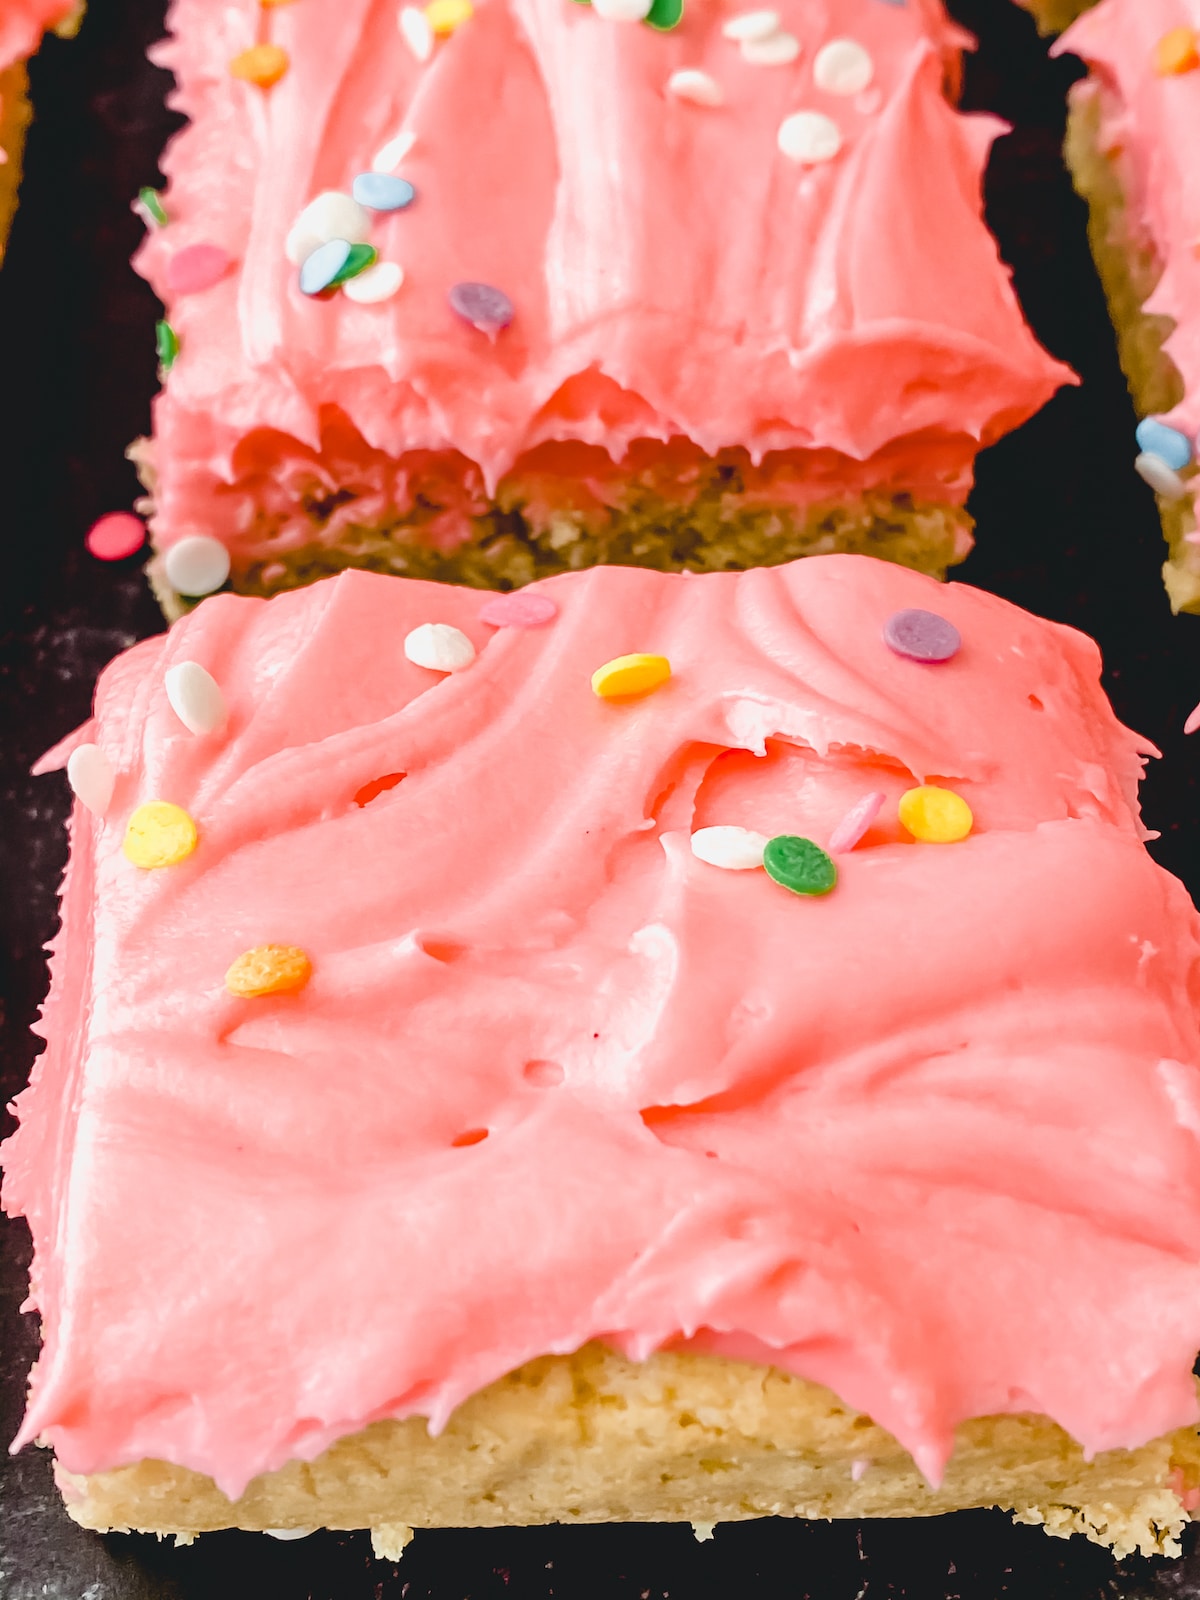 Cookie bars up close with sprinkles on pink icing